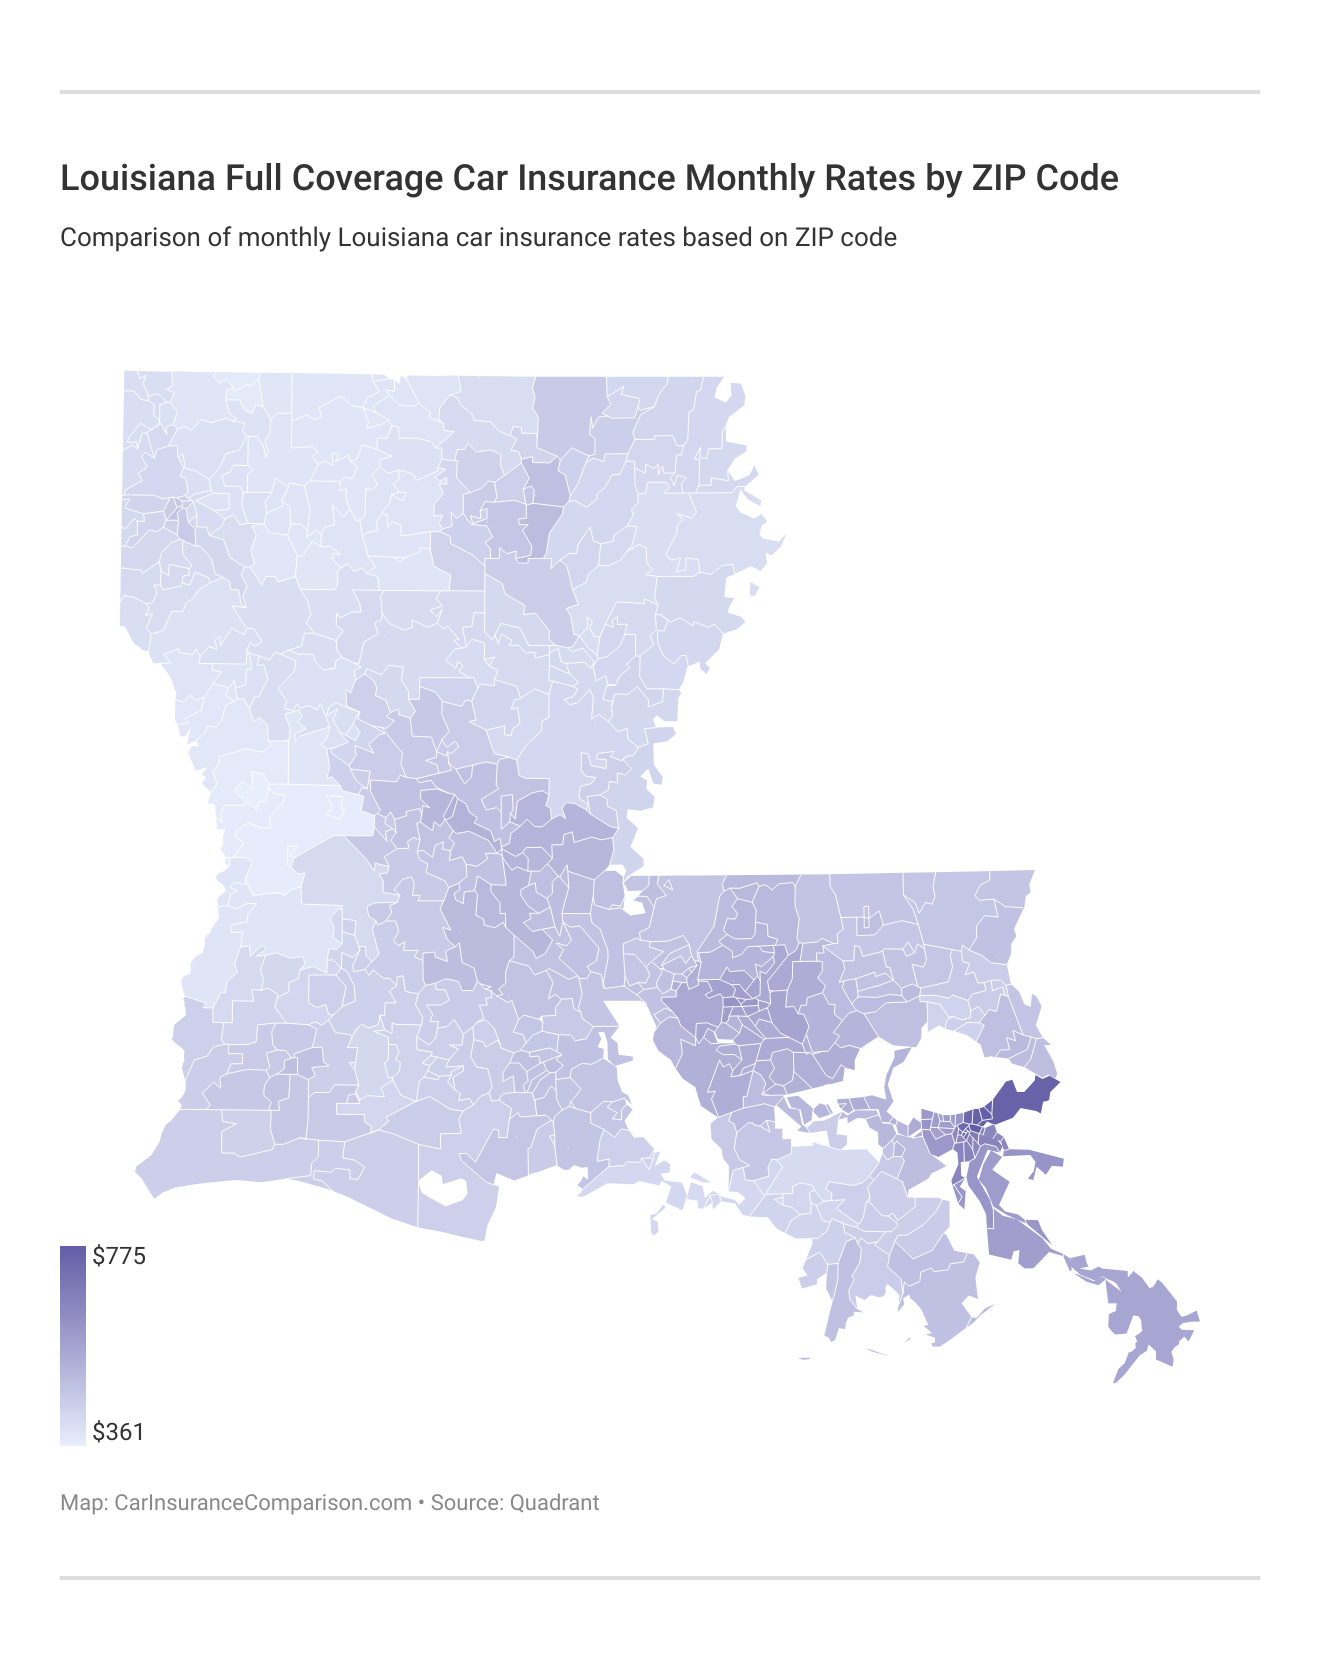 <h3>Louisiana Full Coverage Car Insurance Monthly Rates by ZIP Code</h3>